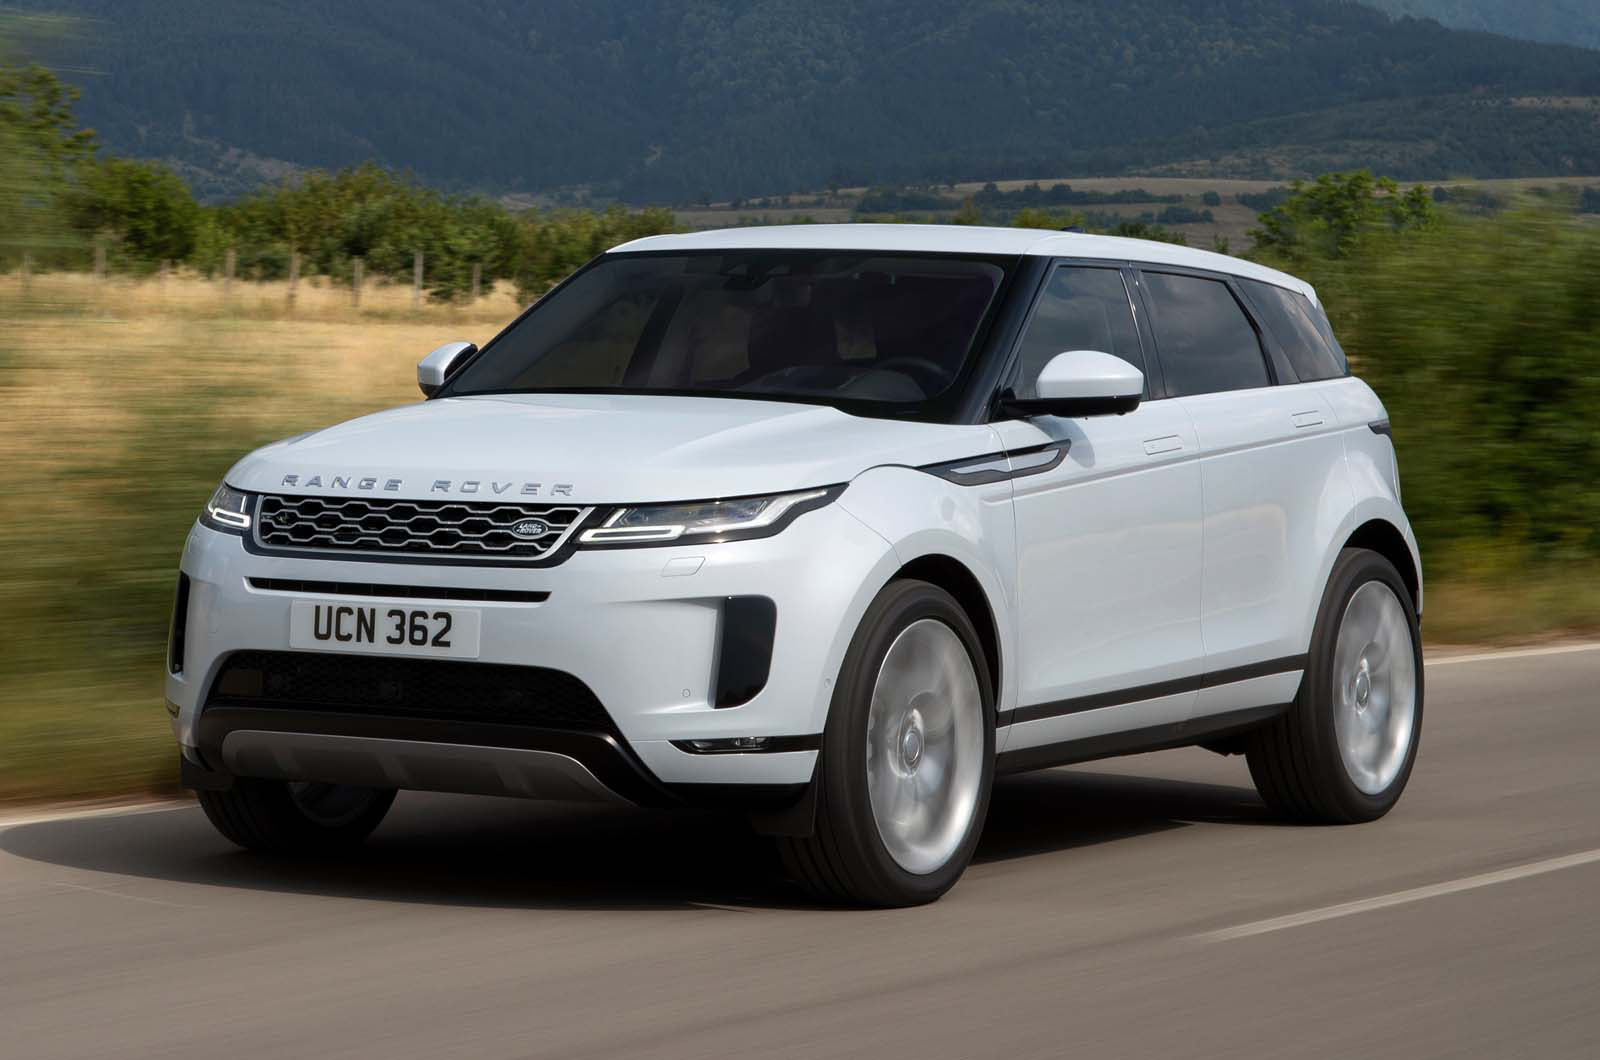 2019 Range Rover Evoque revealed with new tech and mild